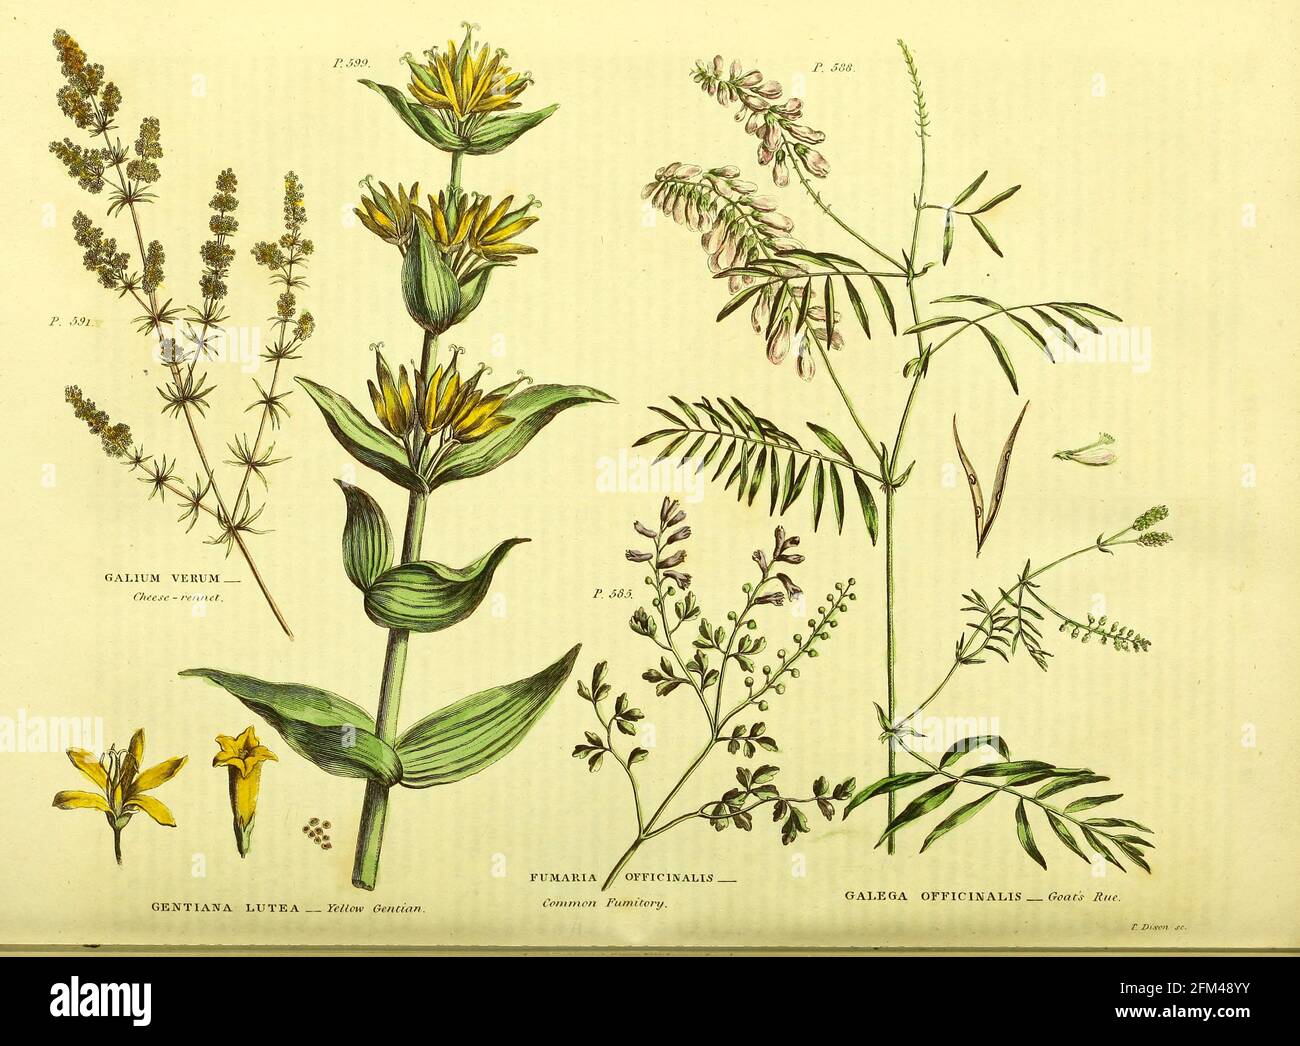 Galium verum [Cheese-rennet] Gentiana lutea [Yellow Gentian] Fumaria officinalis [common Fumitory] Galega officinalis [Goats Rue] from Vol 1 of the book The universal herbal : or botanical, medical and agricultural dictionary : containing an account of all known plants in the world, arranged according to the Linnean system. Specifying the uses to which they are or may be applied By Thomas Green,  Published in 1816 by Nuttall, Fisher & Co. in Liverpool and Printed at the Caxton Press by H. Fisher Stock Photo